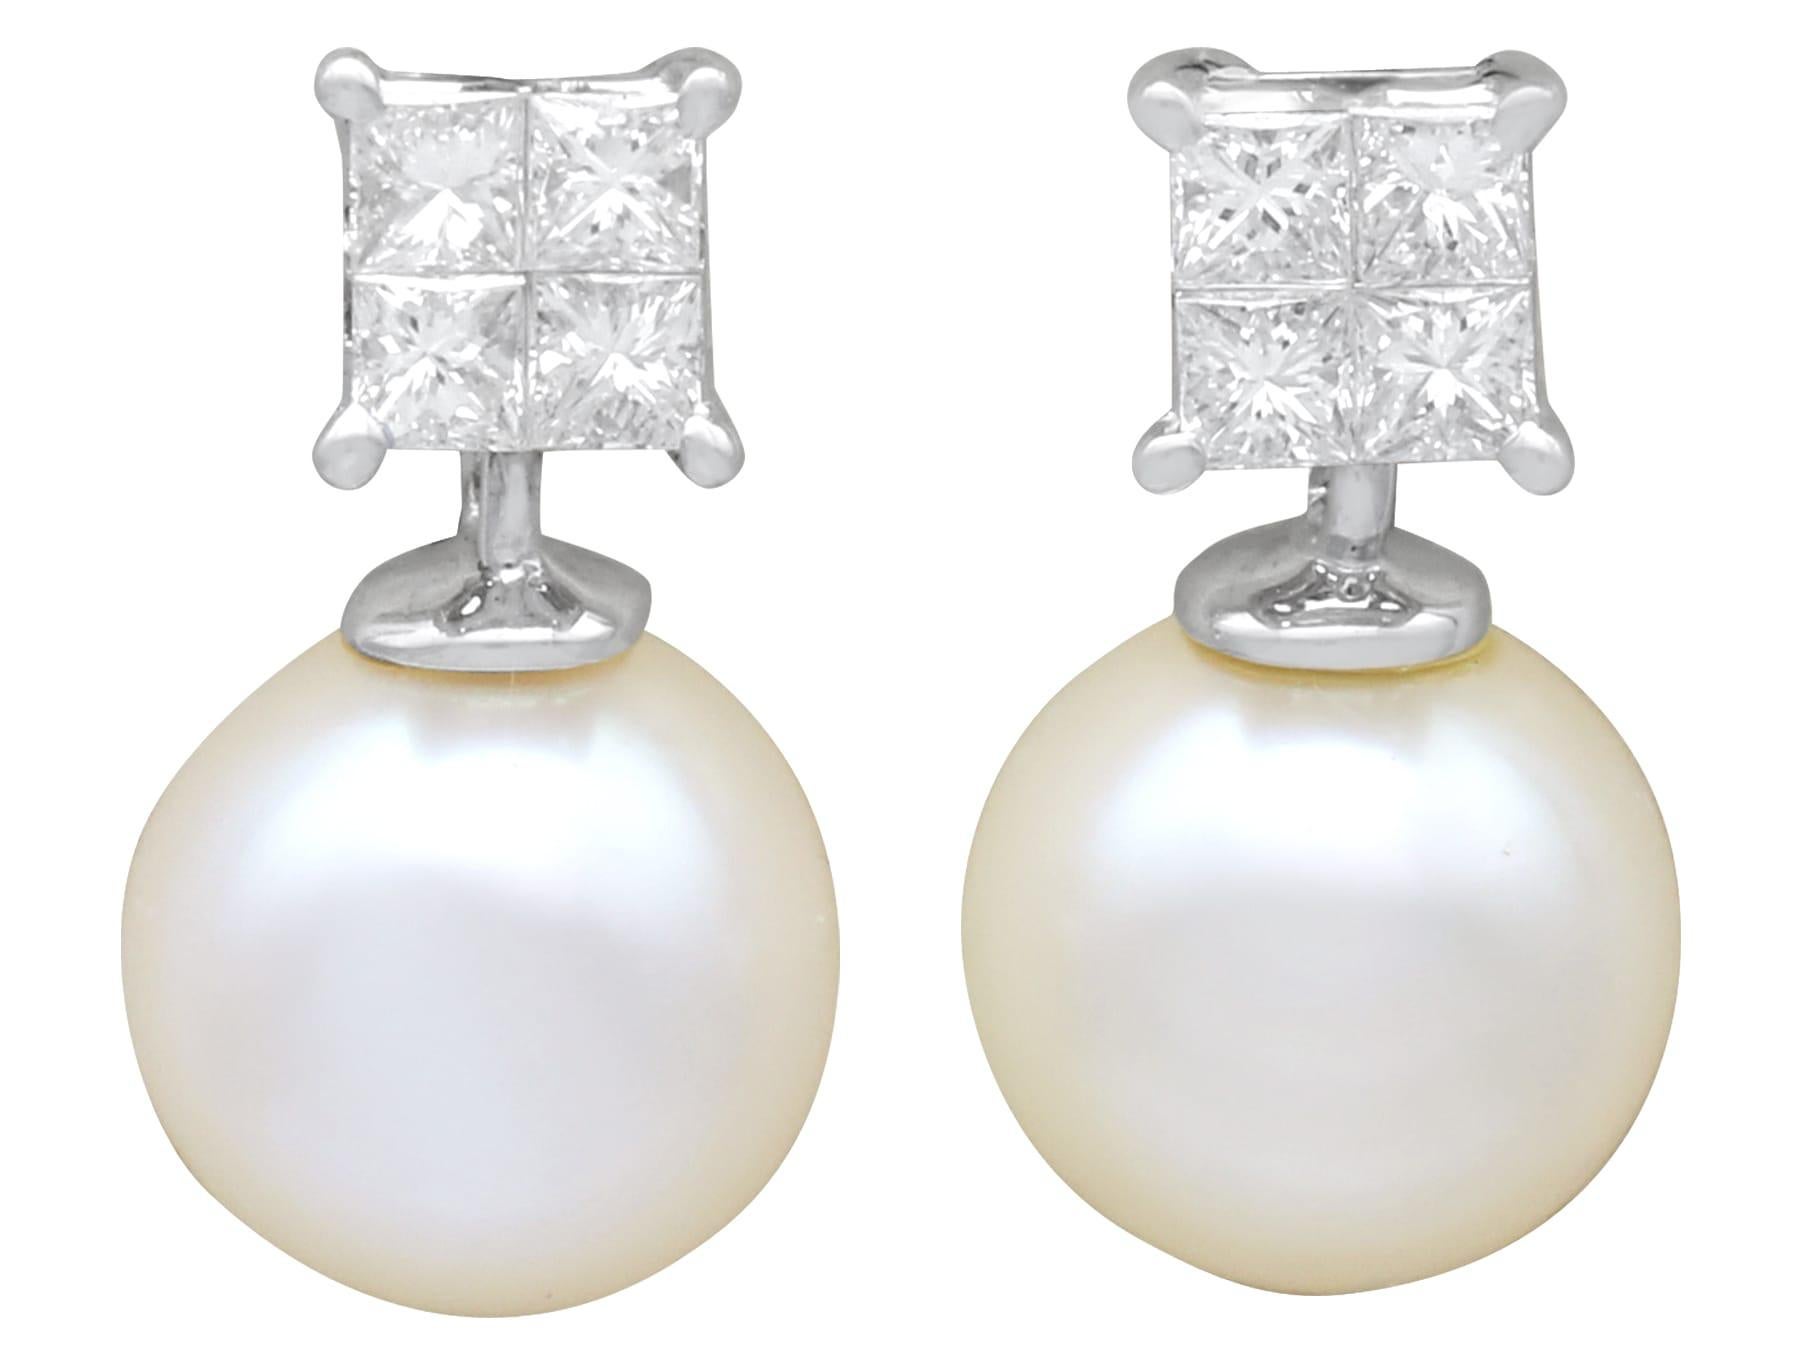 A fine and impressive pair of vintage 7mm cultured pearl and 0.40 carat diamond, 18 karat white gold stud earrings; part of our diverse pearl jewelry collections.

These fine and impressive vintage pearl earrings have been crafted in 18k white